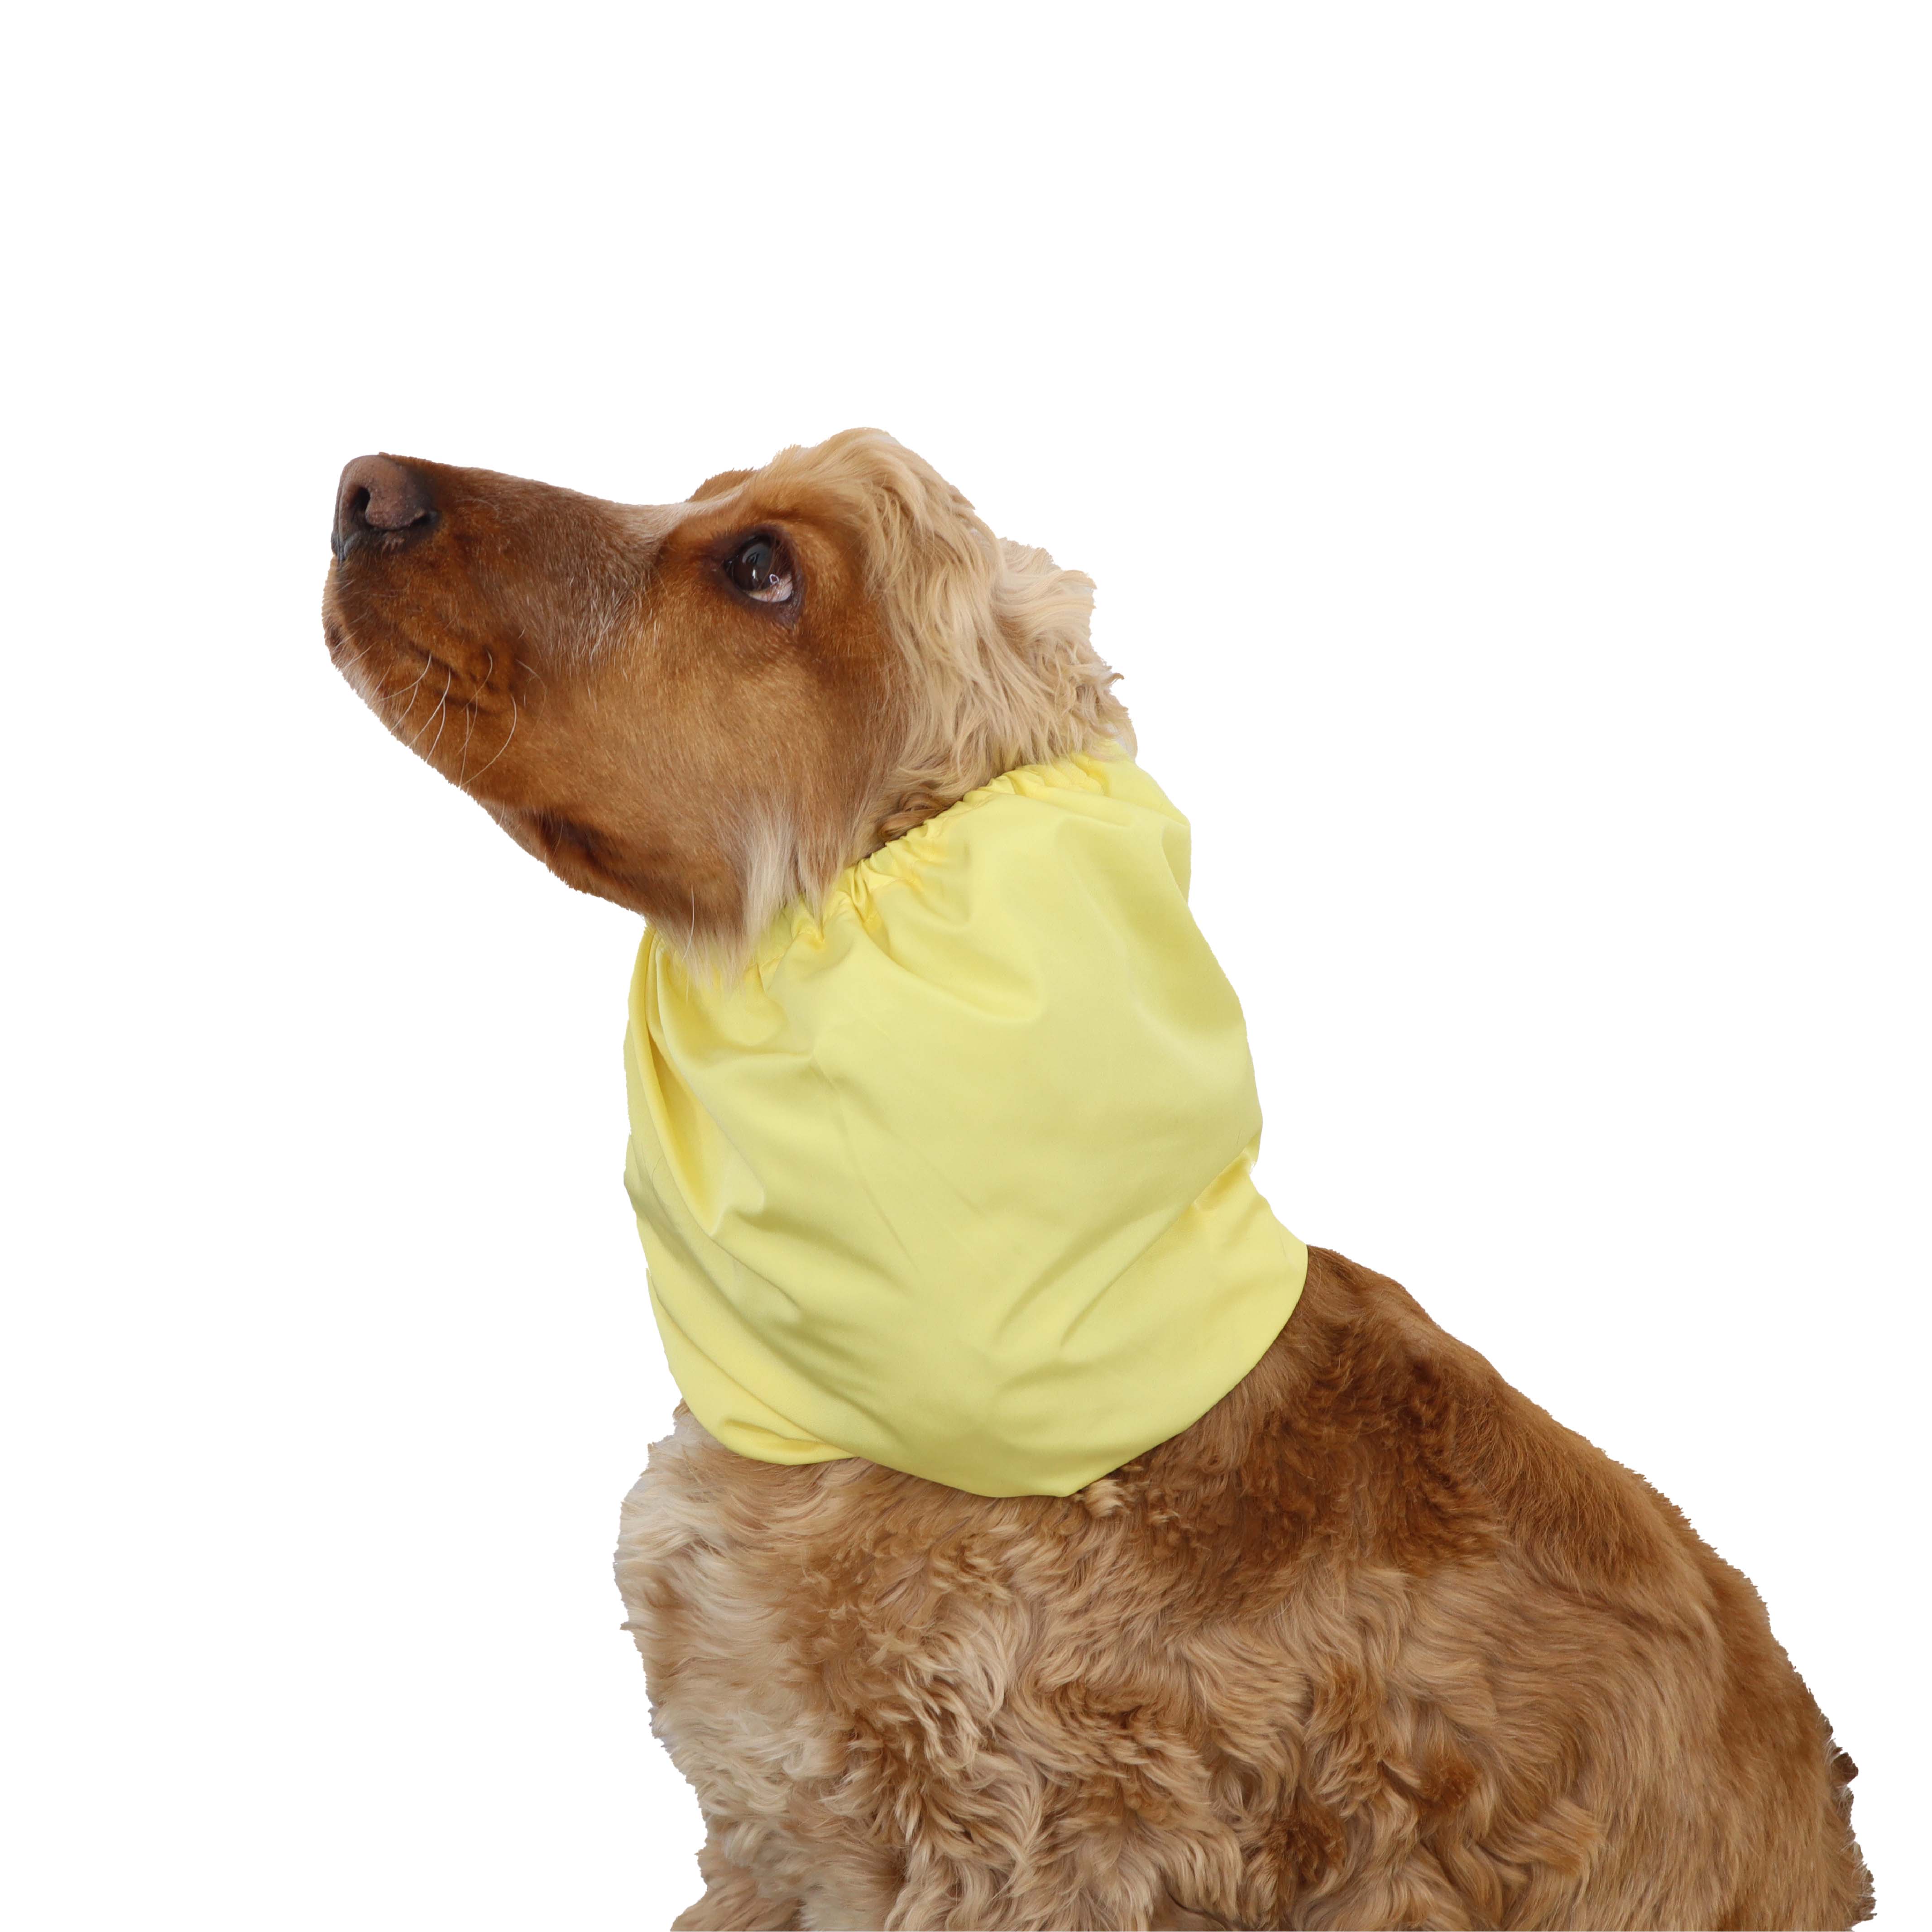 Dog with yellow snood by Distinguish Me